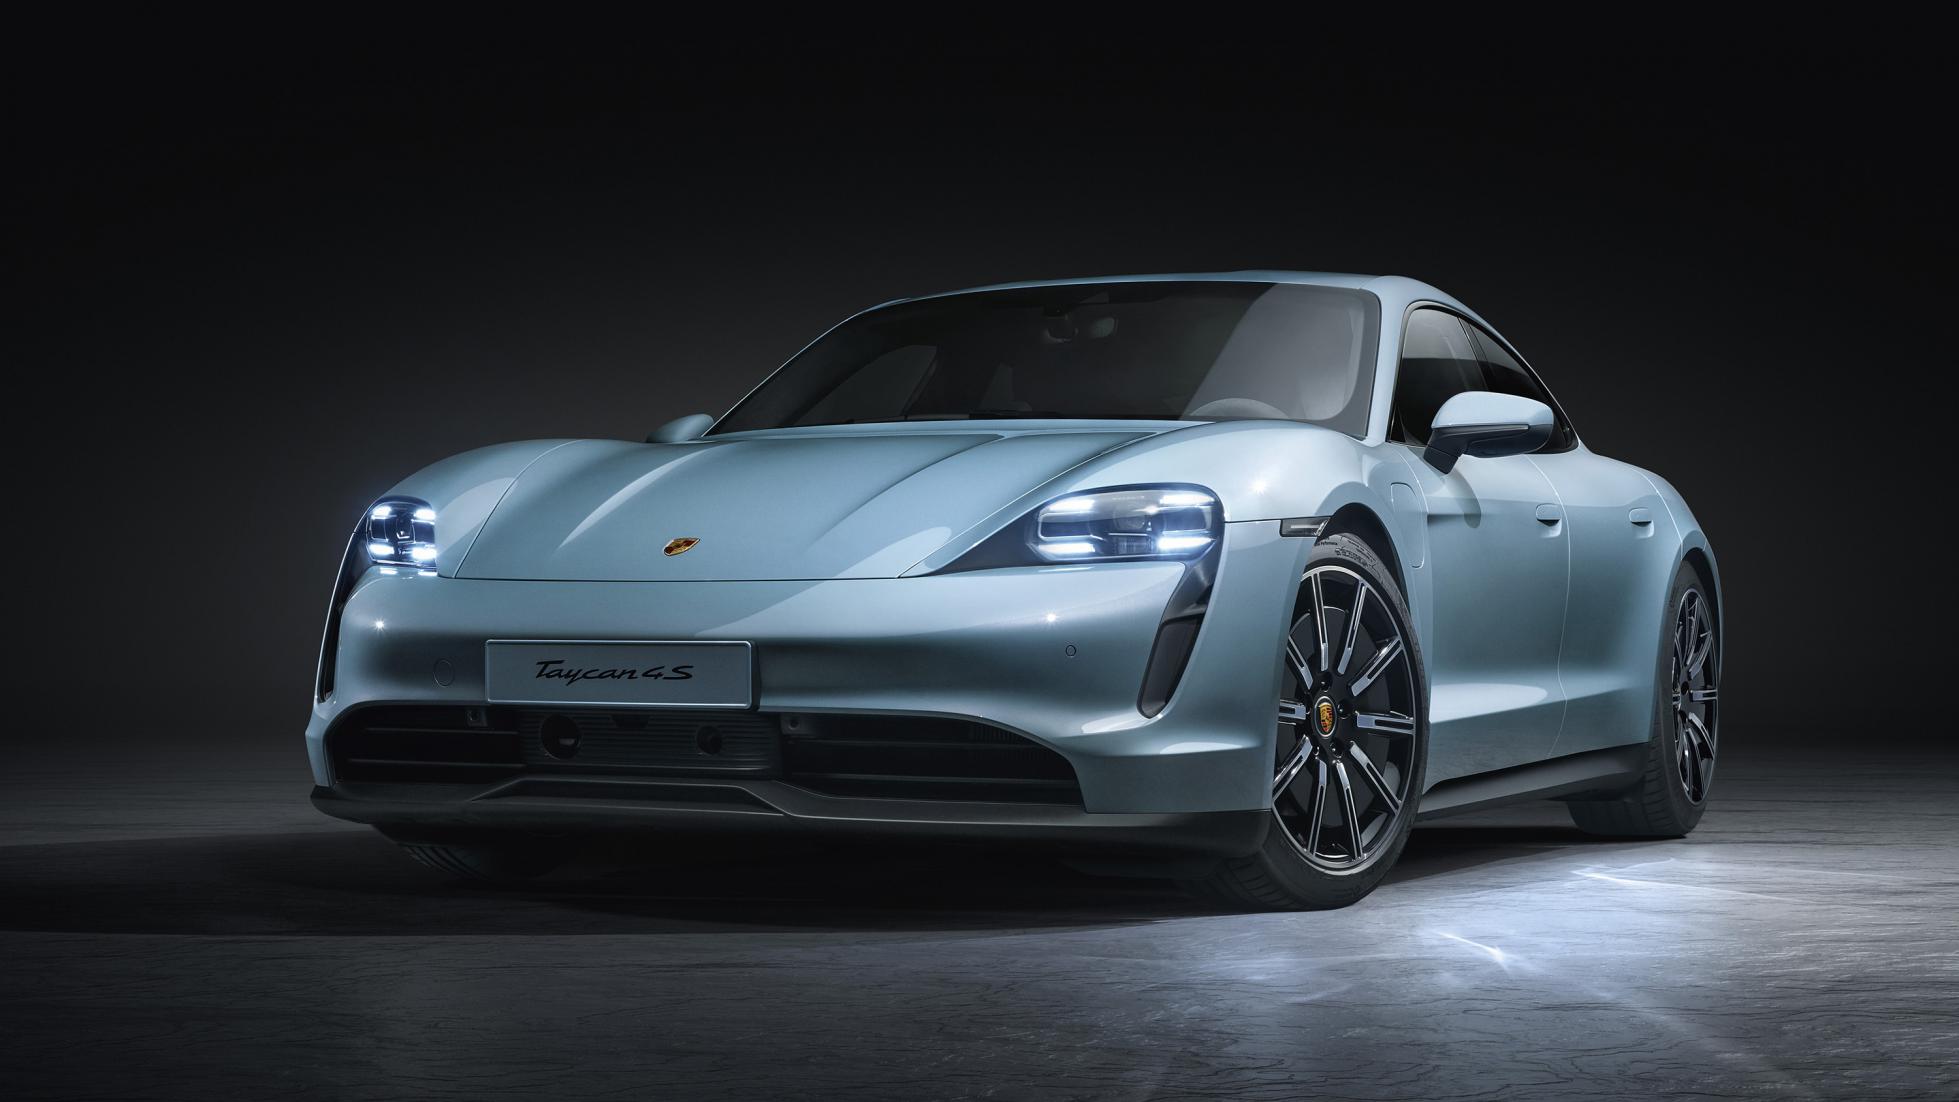 The Porsche Taycan has now dipped under RM529k